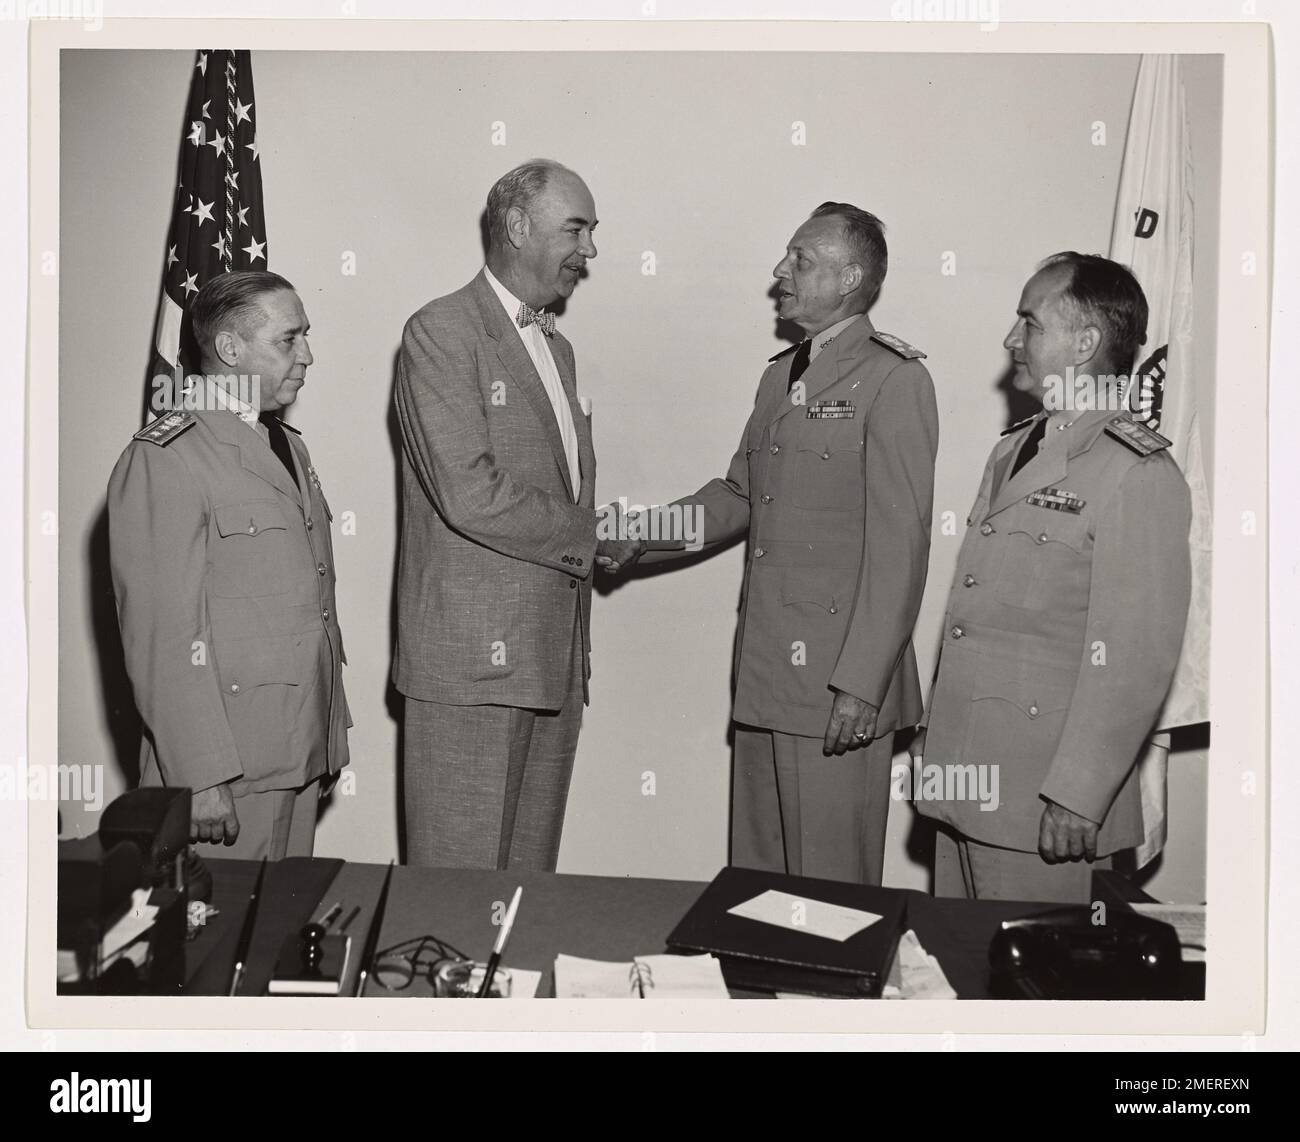 Congressman Shelby is rep. of 5th Dist. San Francisco, California. Swearing-in of Congressman John Shelby as CDR(T) USCGR. Cong Shelby (left) taking oath from VADM Merlin O'Neill, Commandant at Washington, D.C. Hq. Stock Photo